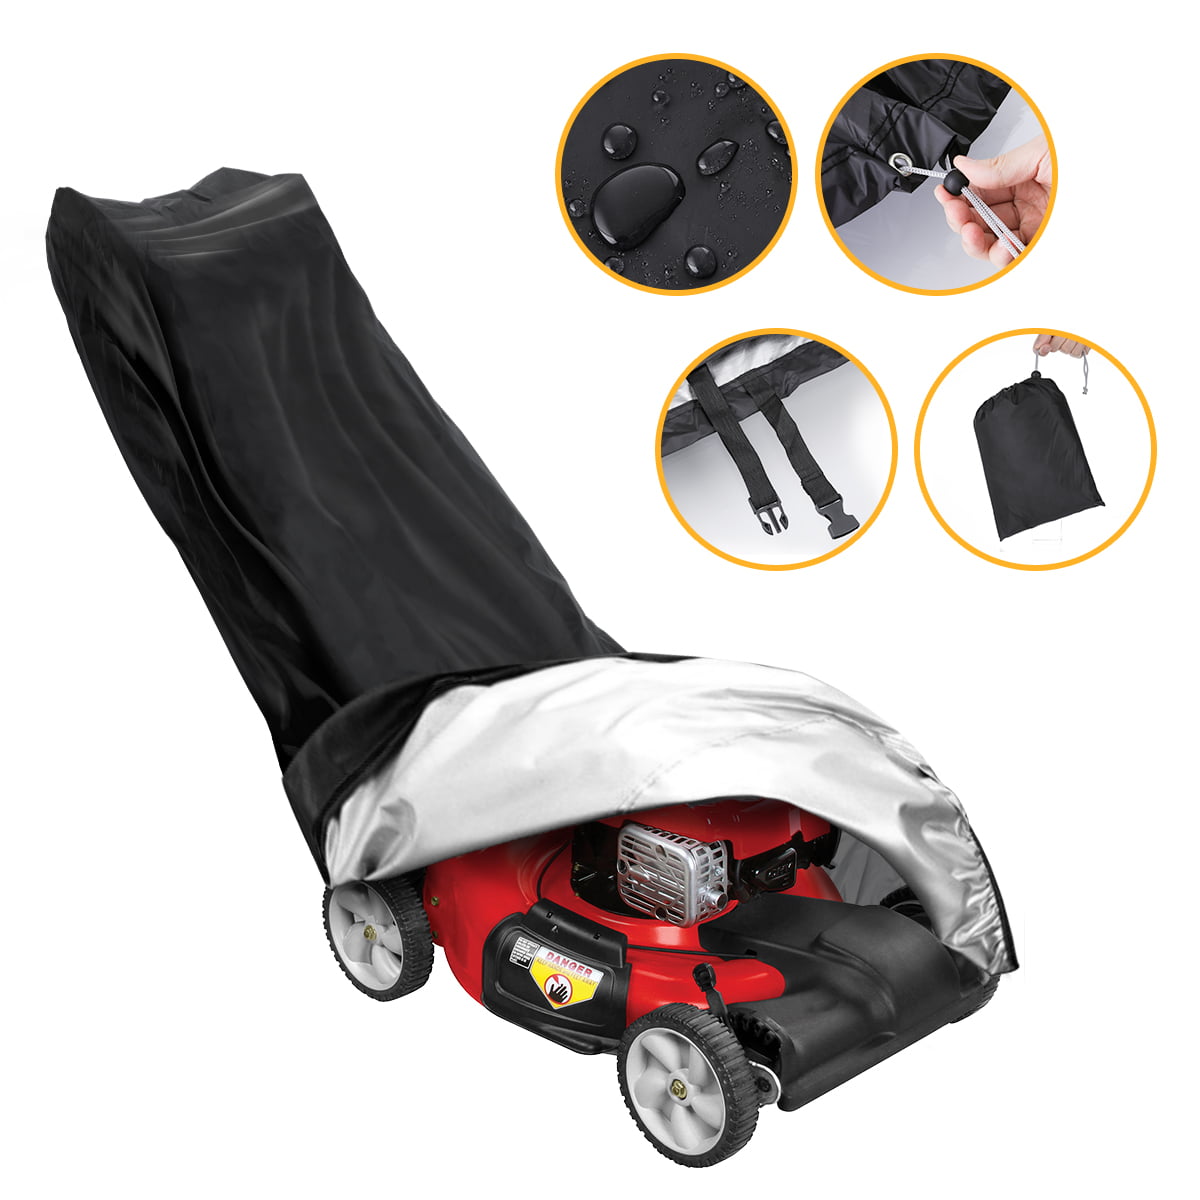 Outdoor Sun Snow UV Protector Universal Fit with Drawstring & Cover Storage Bag. Keep Sunday Lawn Mower Cover Heavy Duty 600D Polyester Oxford Waterproof